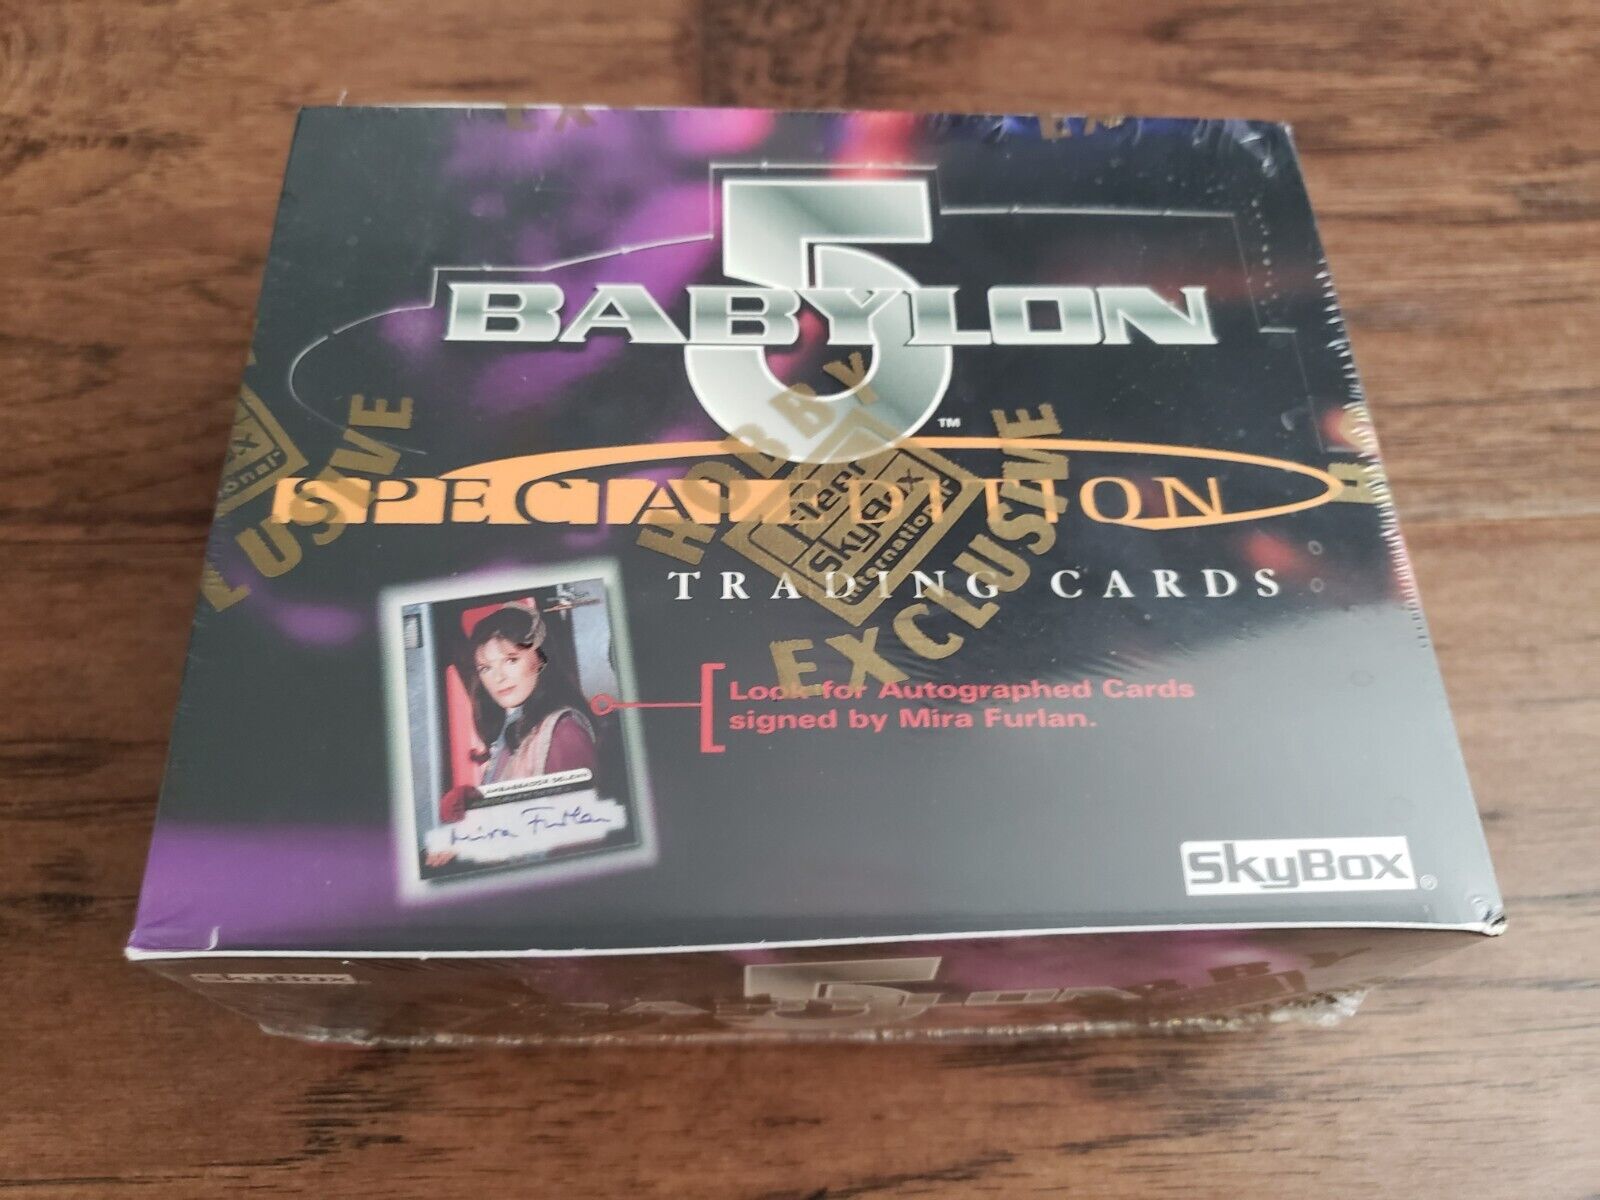 1997 SKYBOX BABYLON 5 SPECIAL EDITION FACTORY SEALED BOX TRADING CARDS